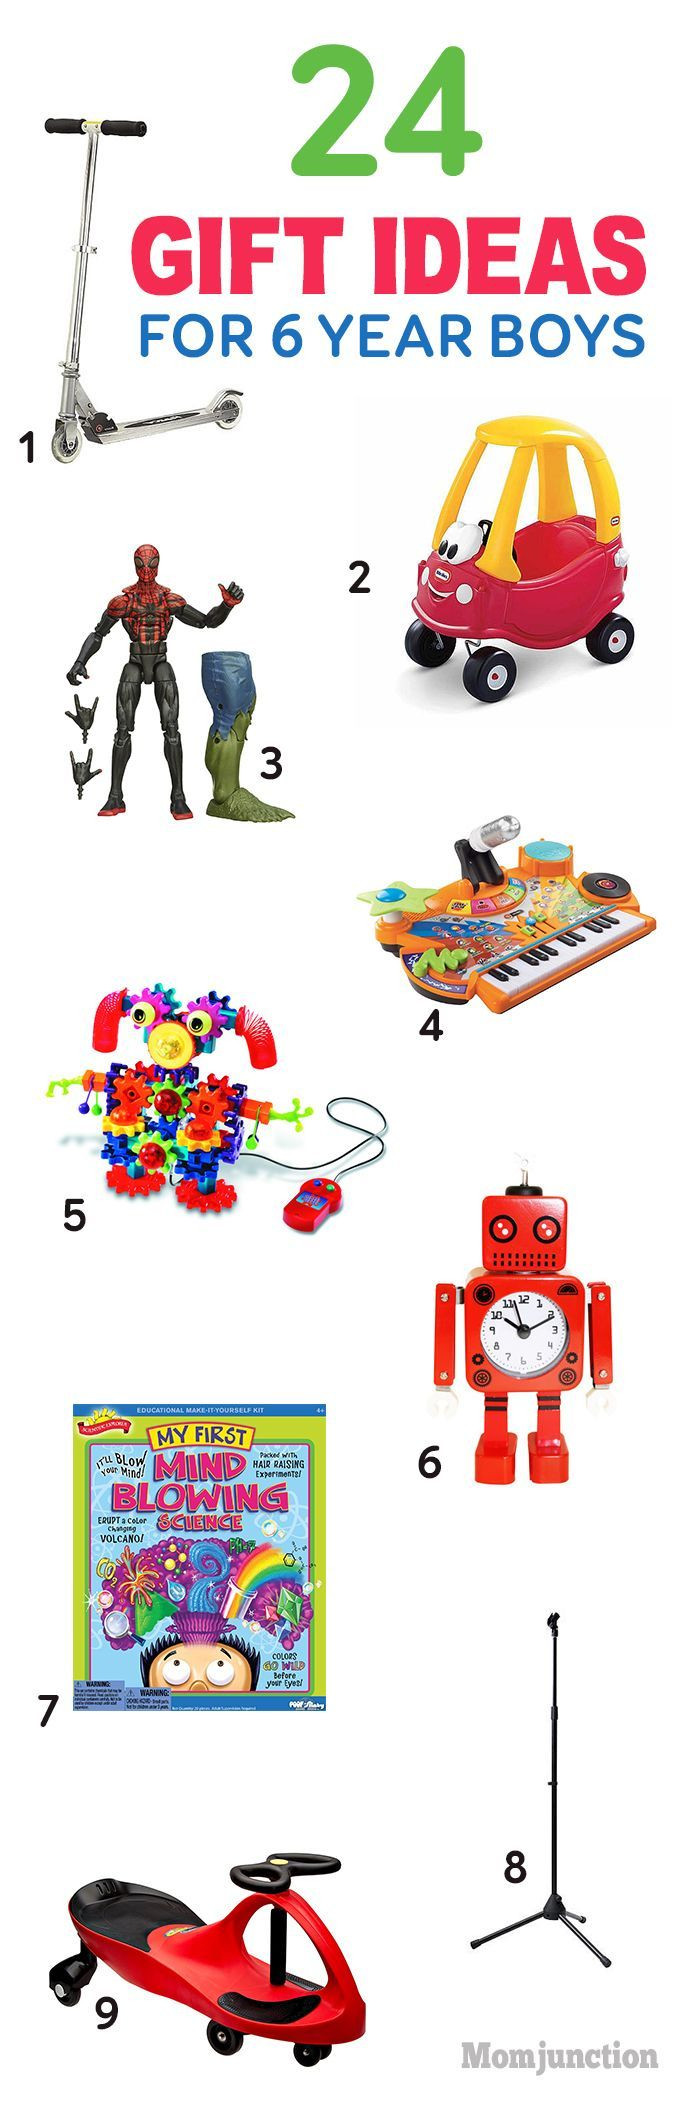 Gift Ideas For 8 Year Old Boys
 17 Best images about Toys for 7 year old boy on Pinterest